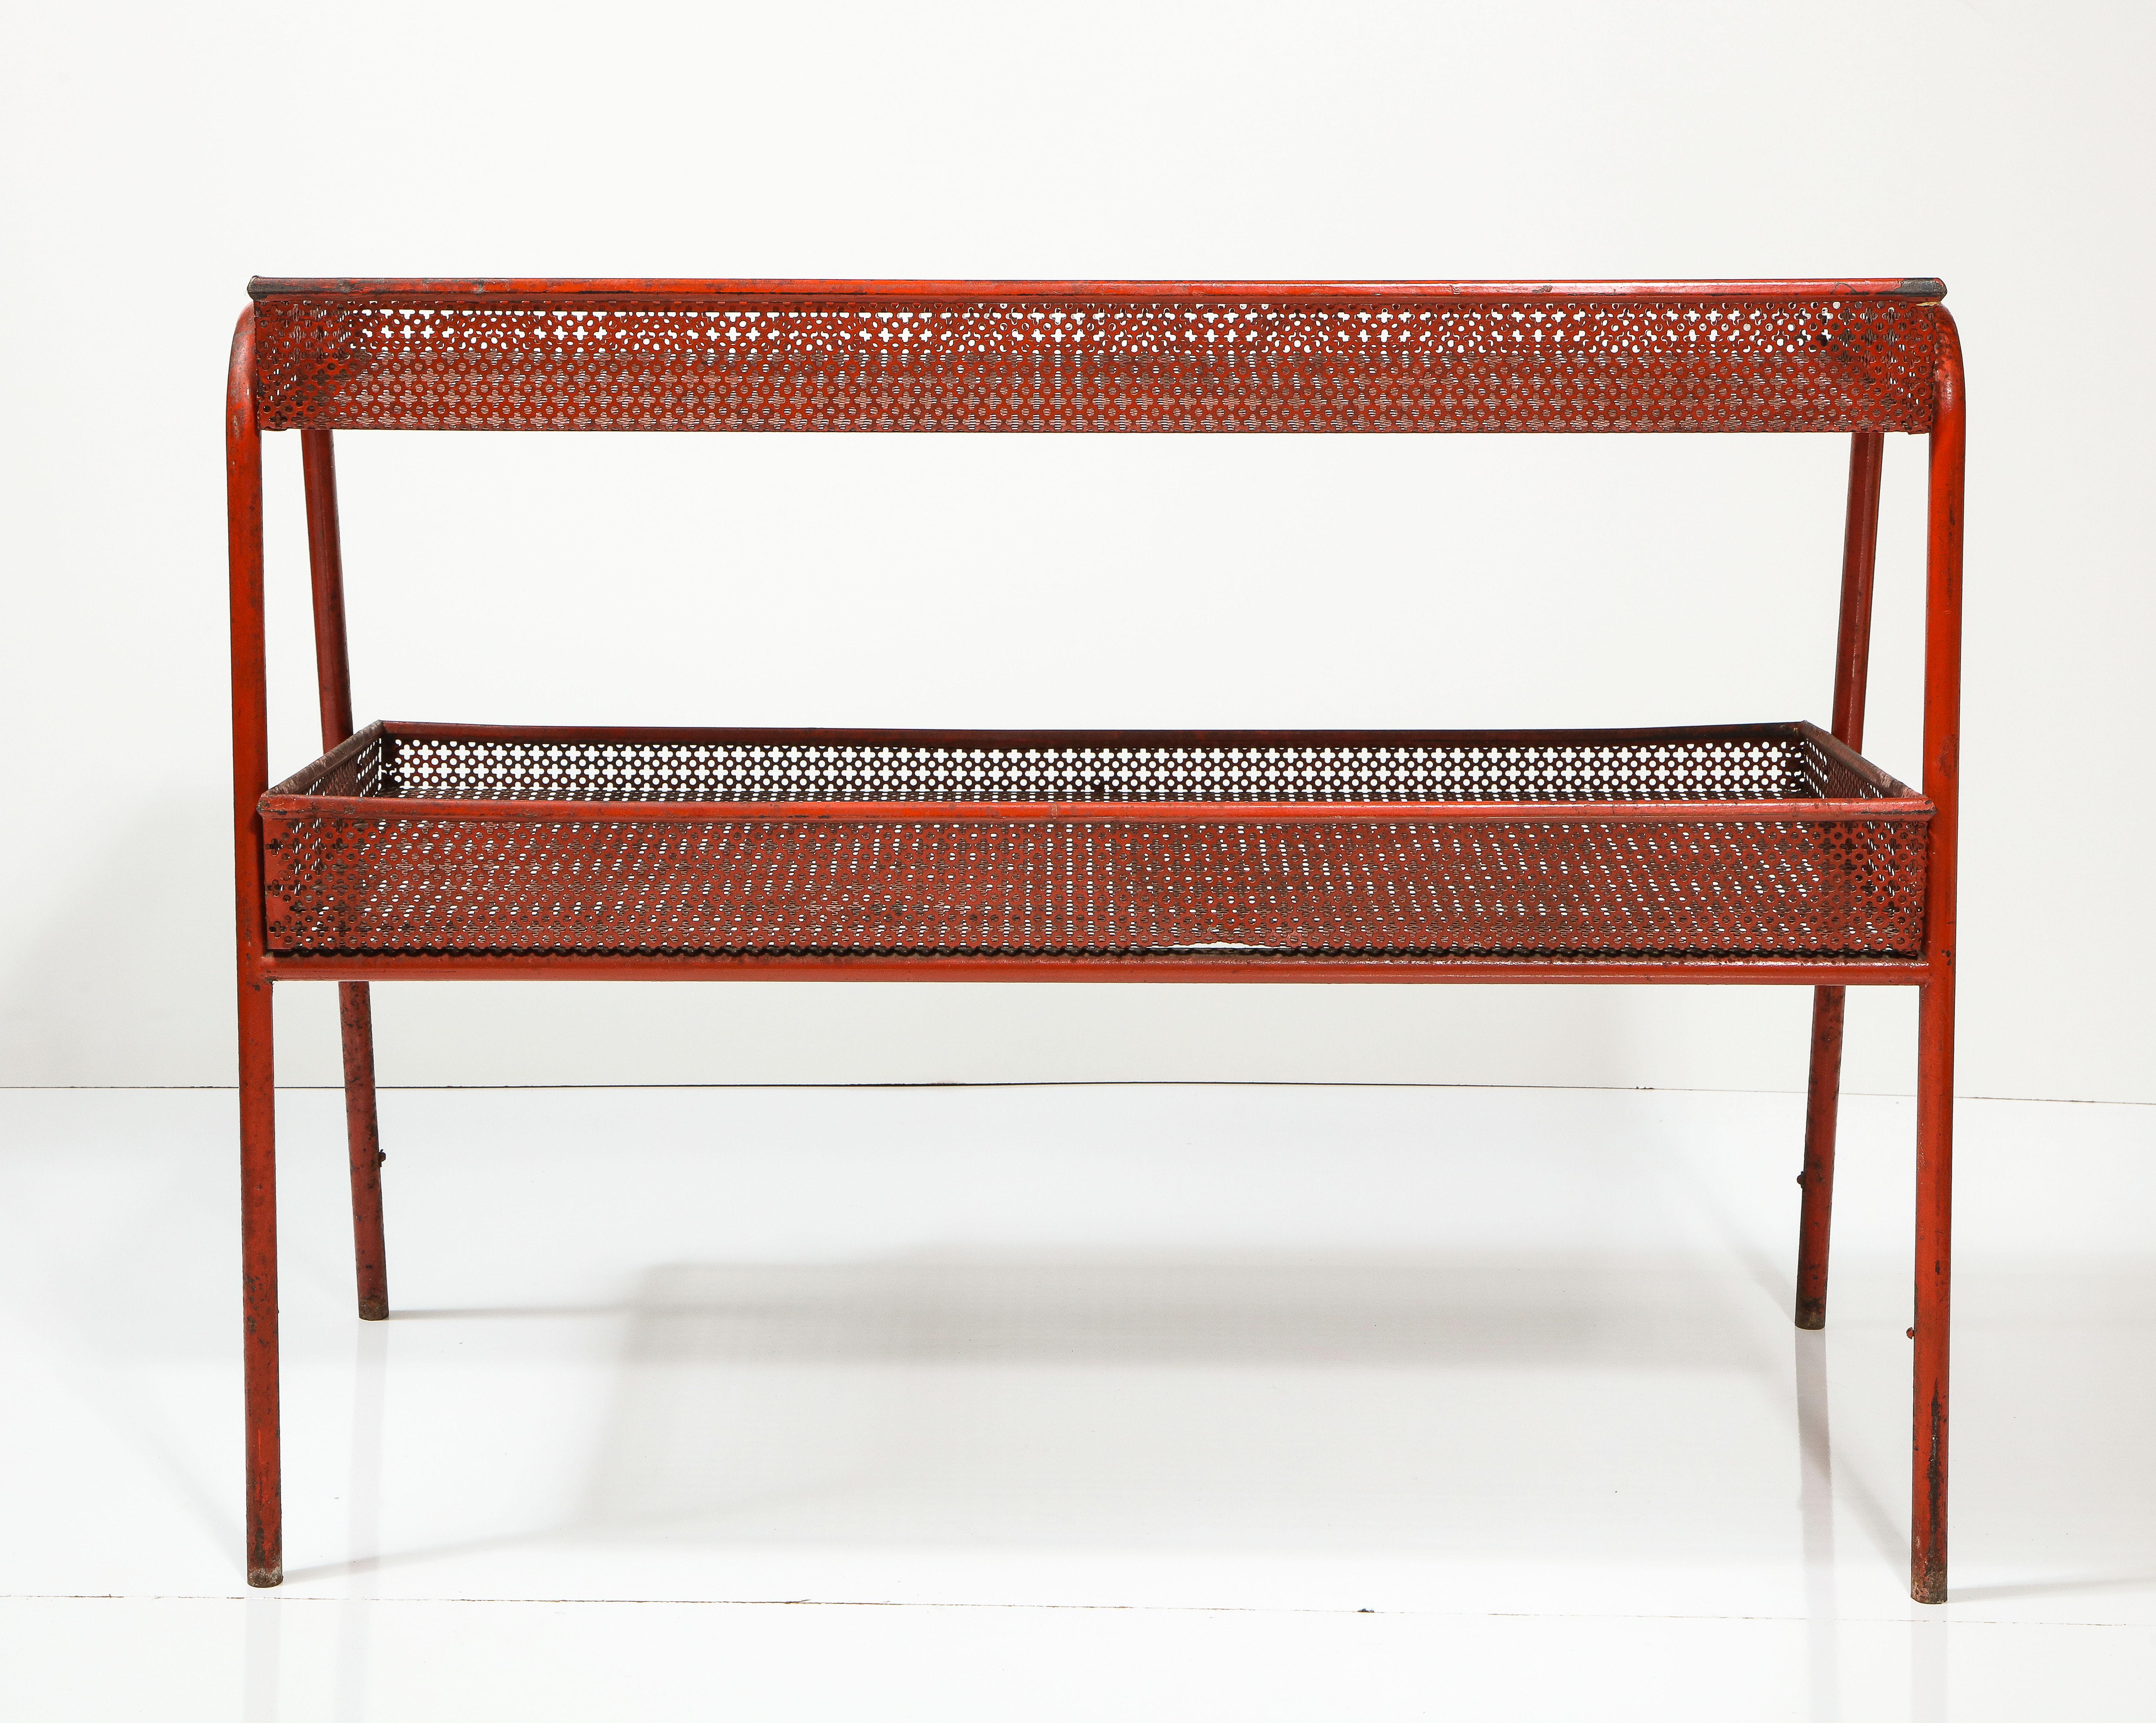 Painted Red Metal Shelf attributed to Mathieu Mategot, France, c. 1940 For Sale